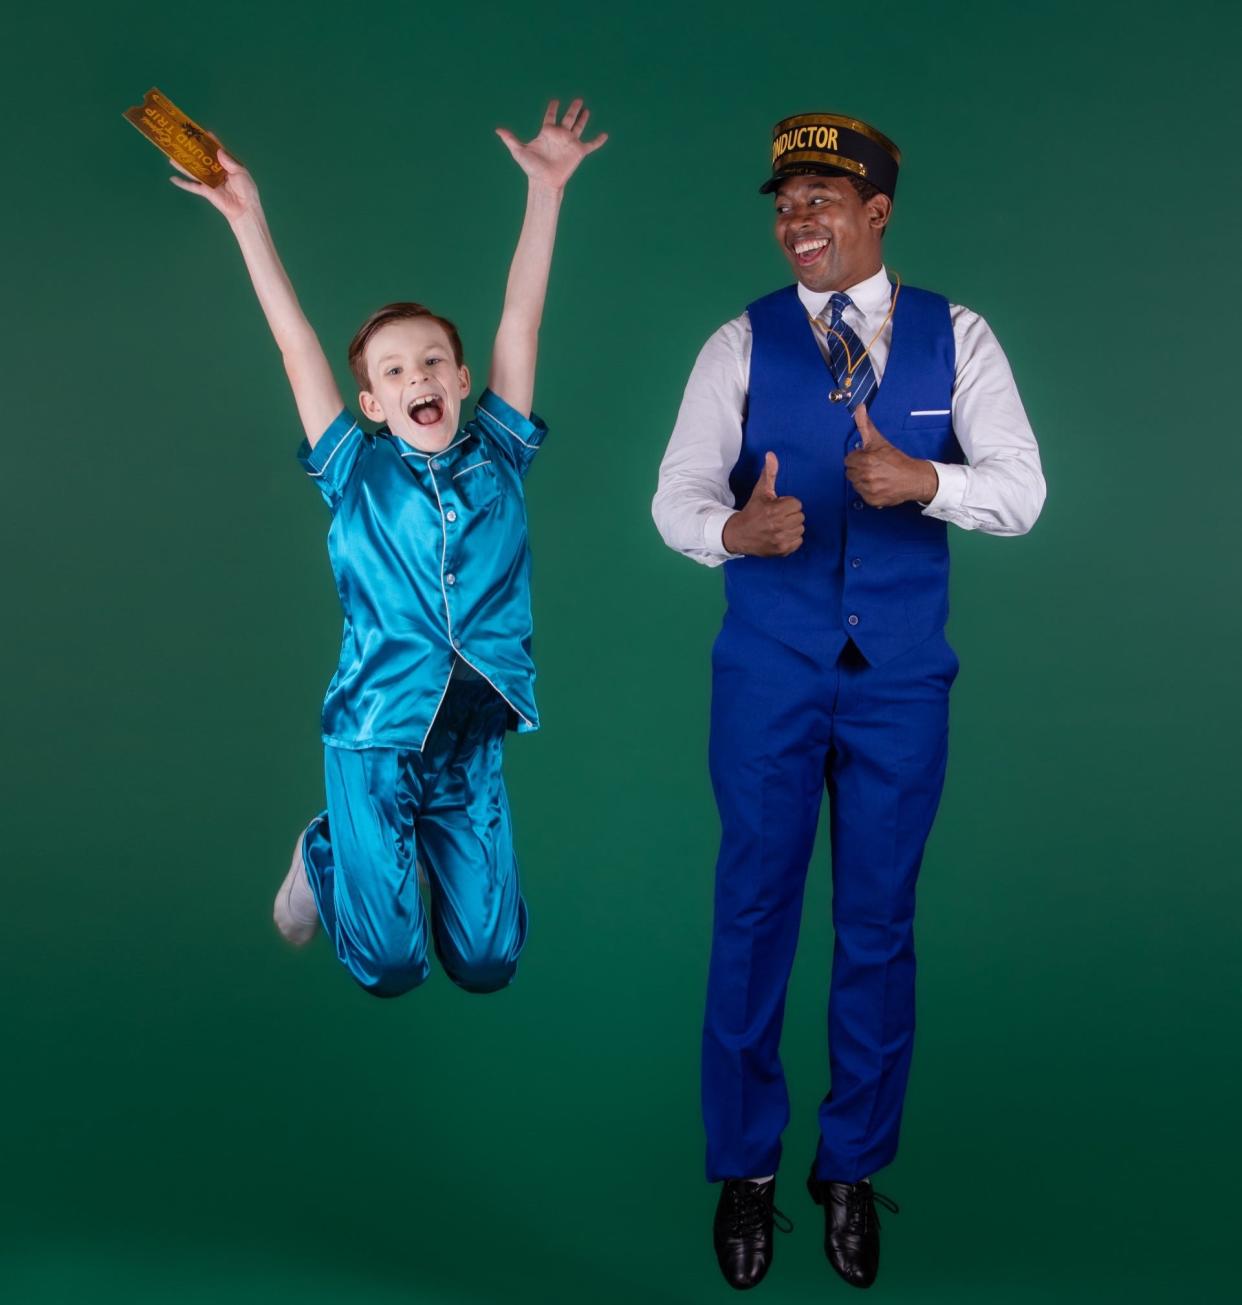 Christopher Pollack of Wall Township and Robert Taylor Jr. star in "The Polar Express" at Axelrod Performing Arts Center. During the run, Jake Ward of Brick alternates with Christopher in the role of Hero Boy.